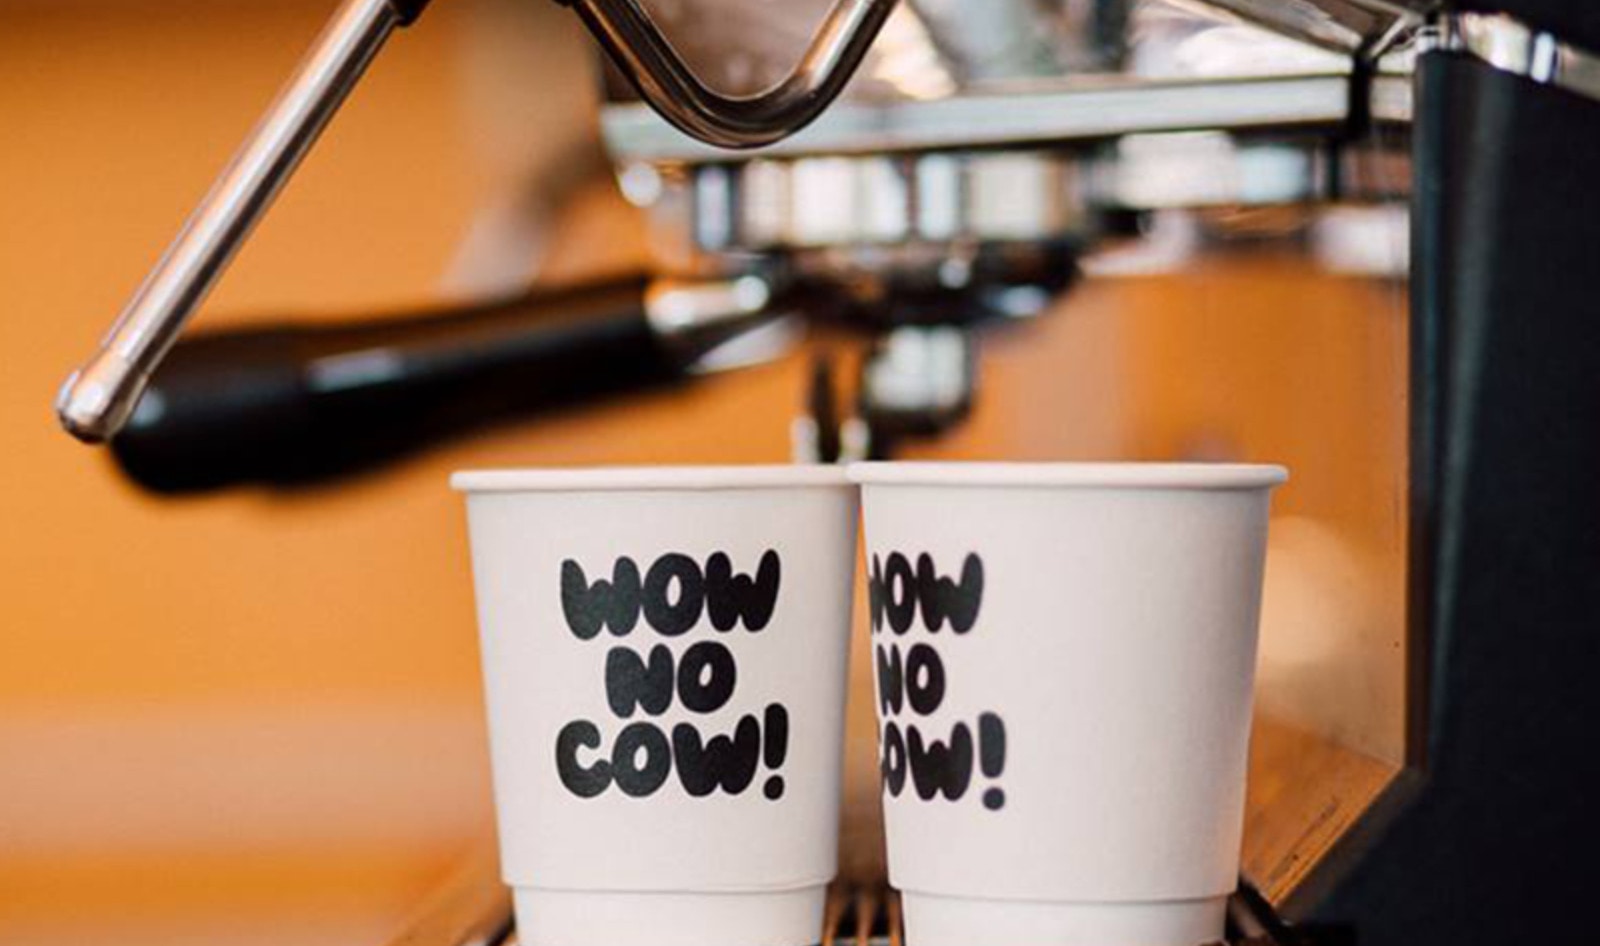 Vegan Milk Brand Oatly Disses Dairy in New Ad Campaign